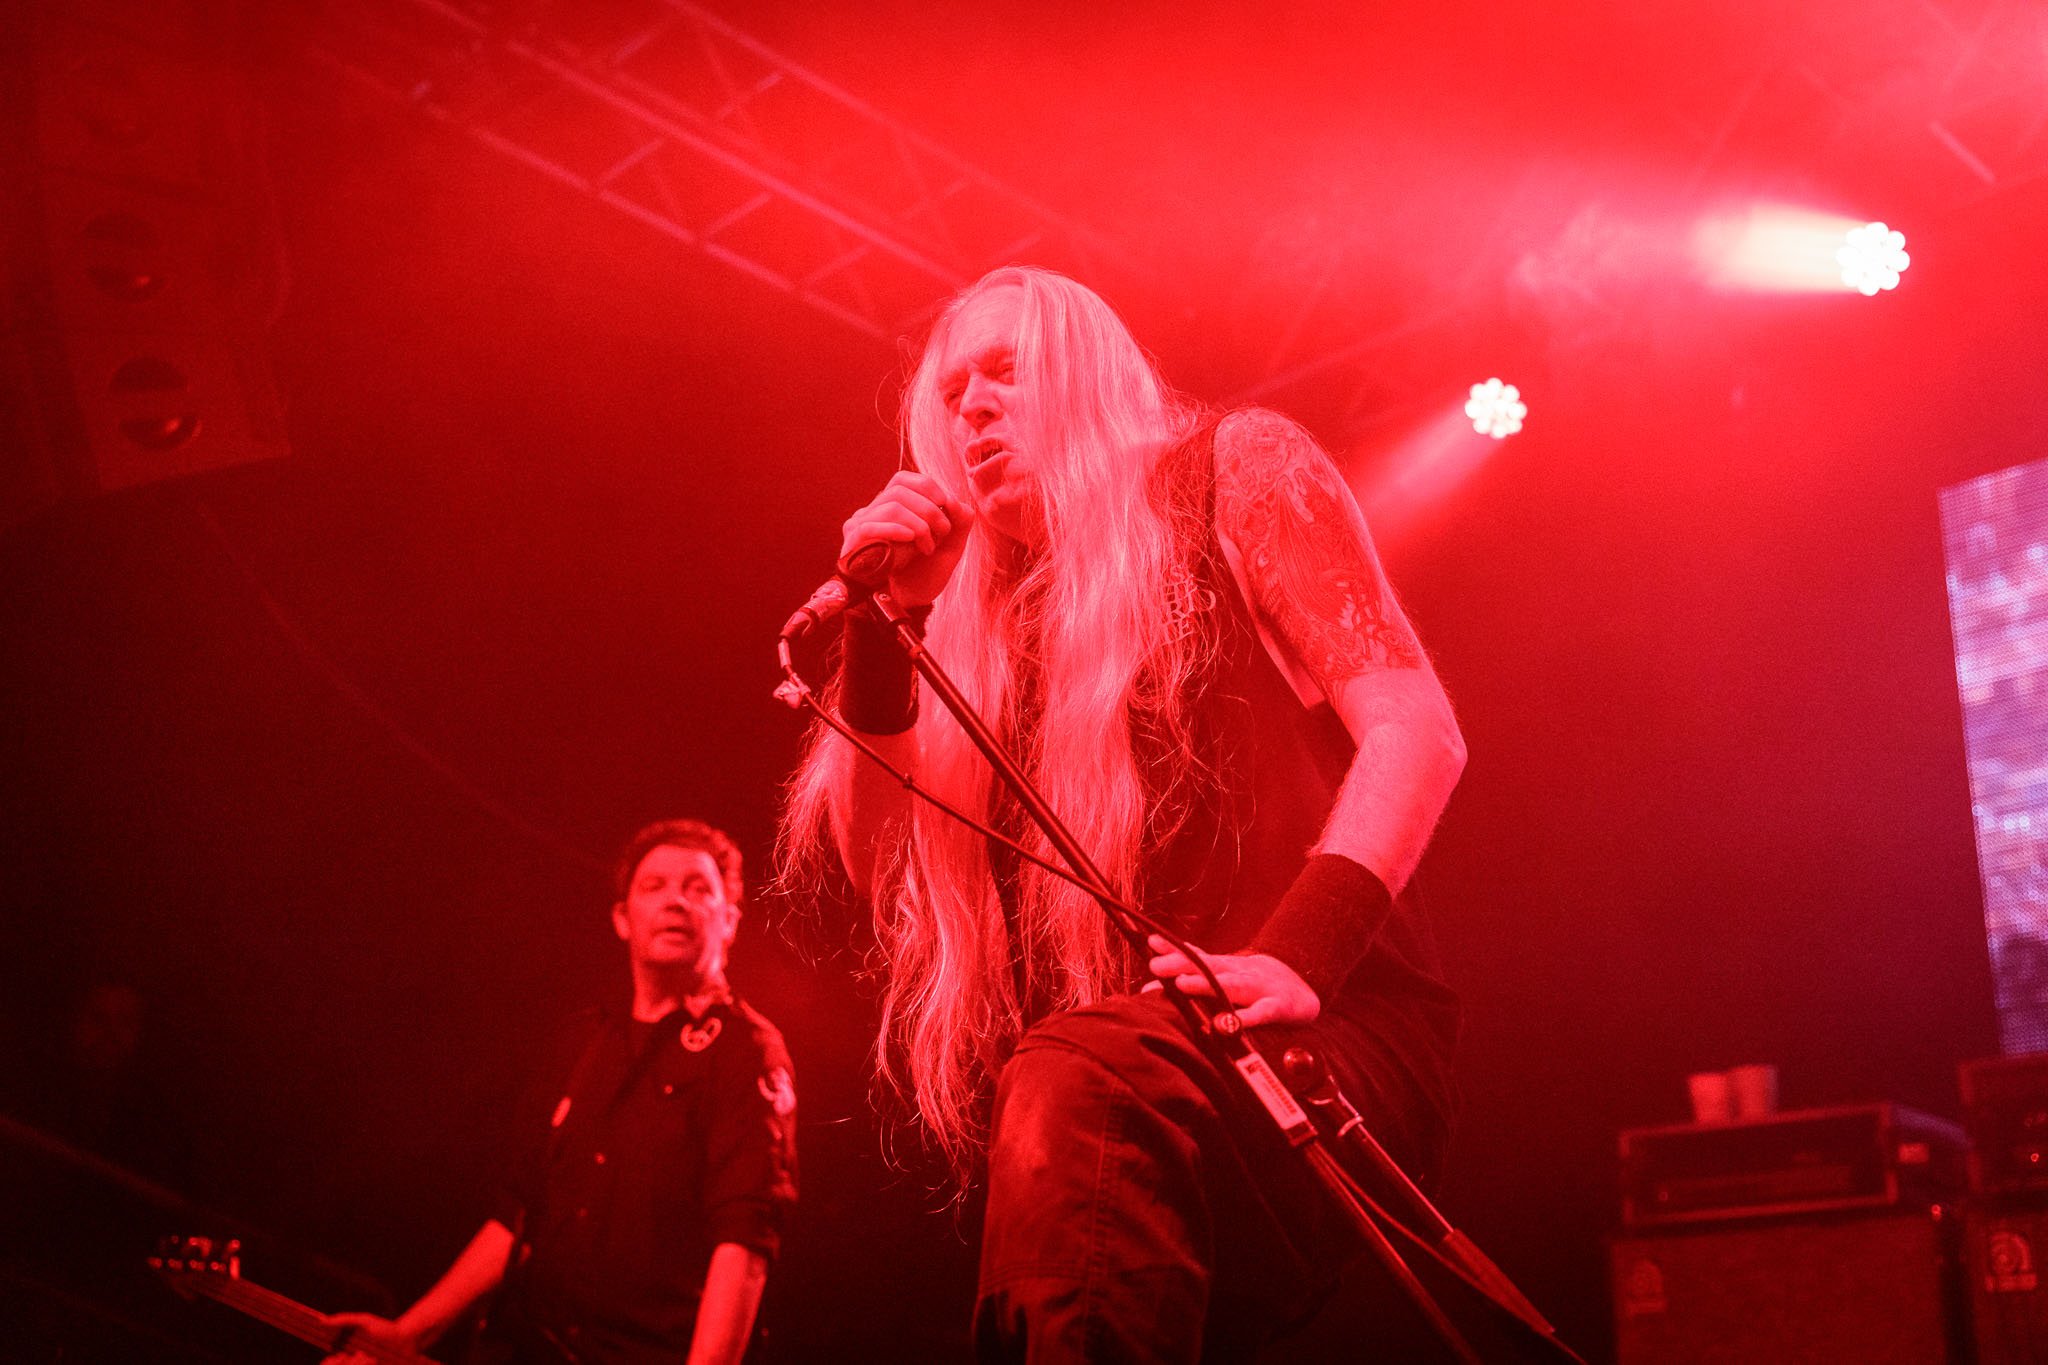 Memoriam at the Damnation Festival in Leeds on November 6th 2021